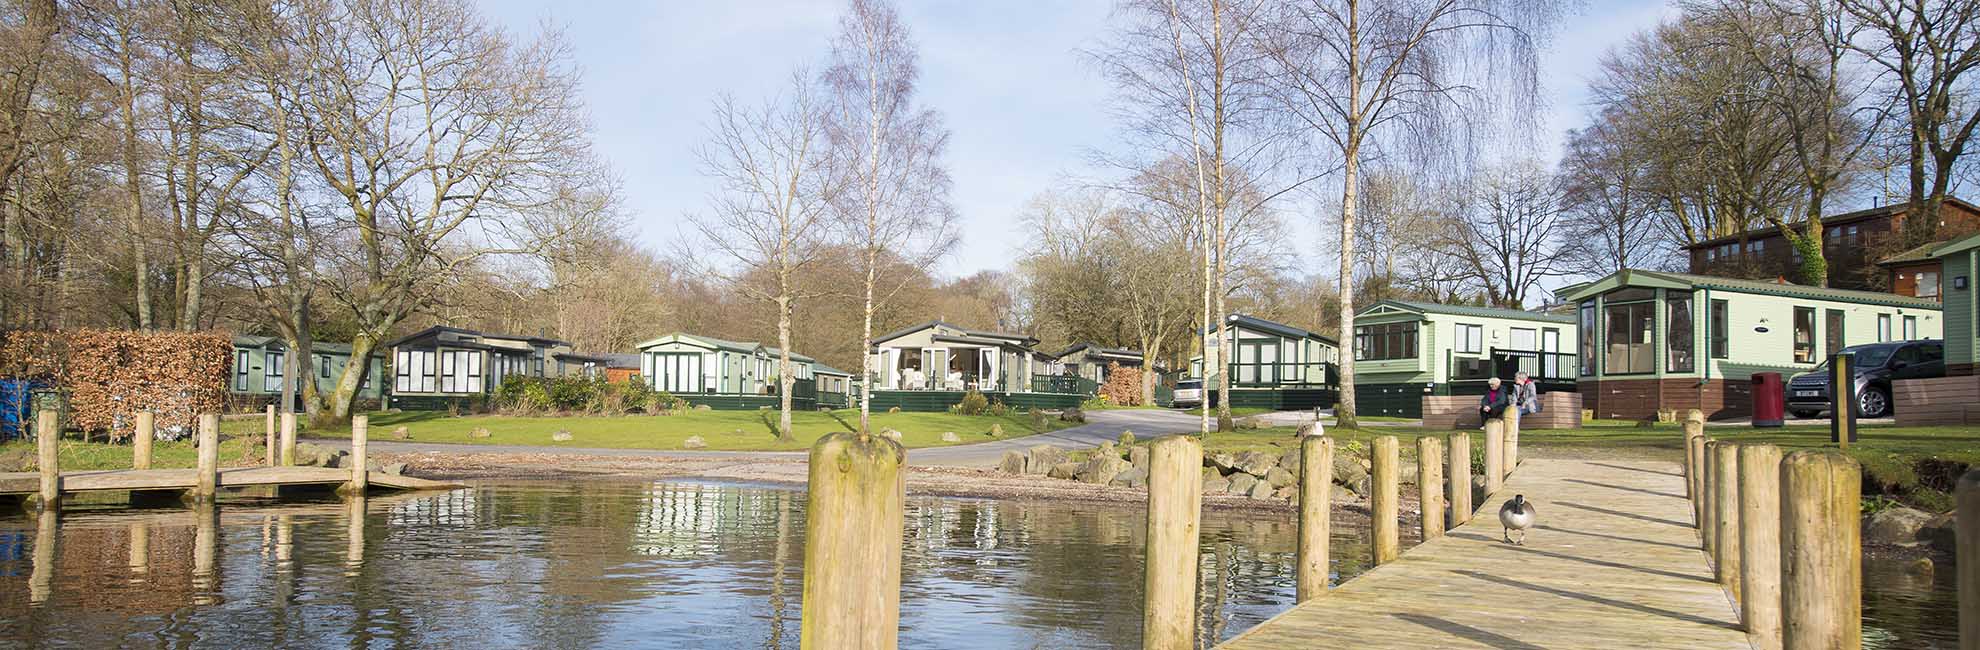 Lodges by the lake at a Lake District holiday park